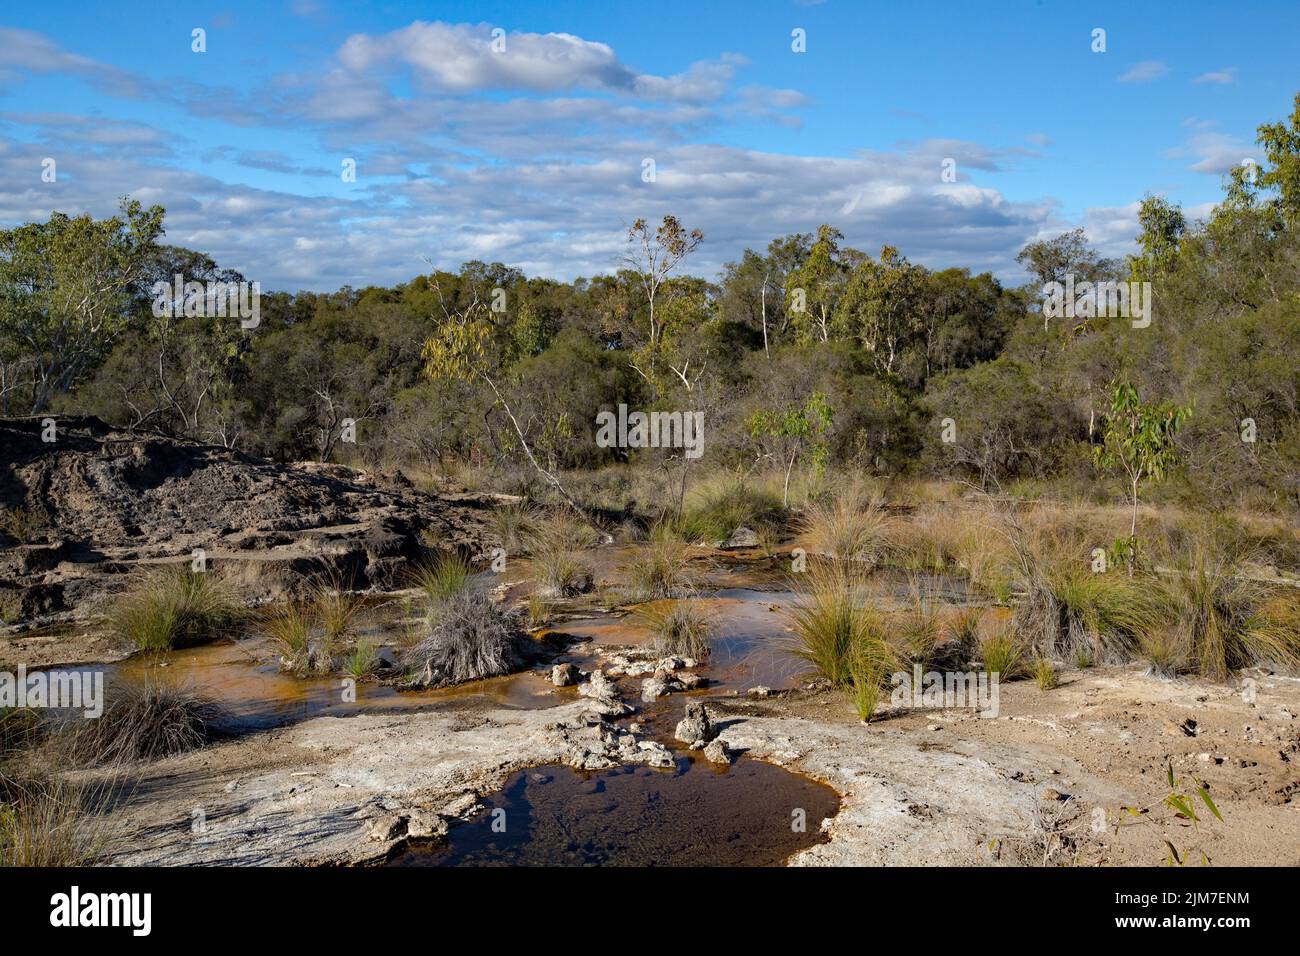 Talaroo Hot Springs produce water at around 60°C seeping into pools before discharging to the Einasleigh River system in tropical Queensland. Stock Photo